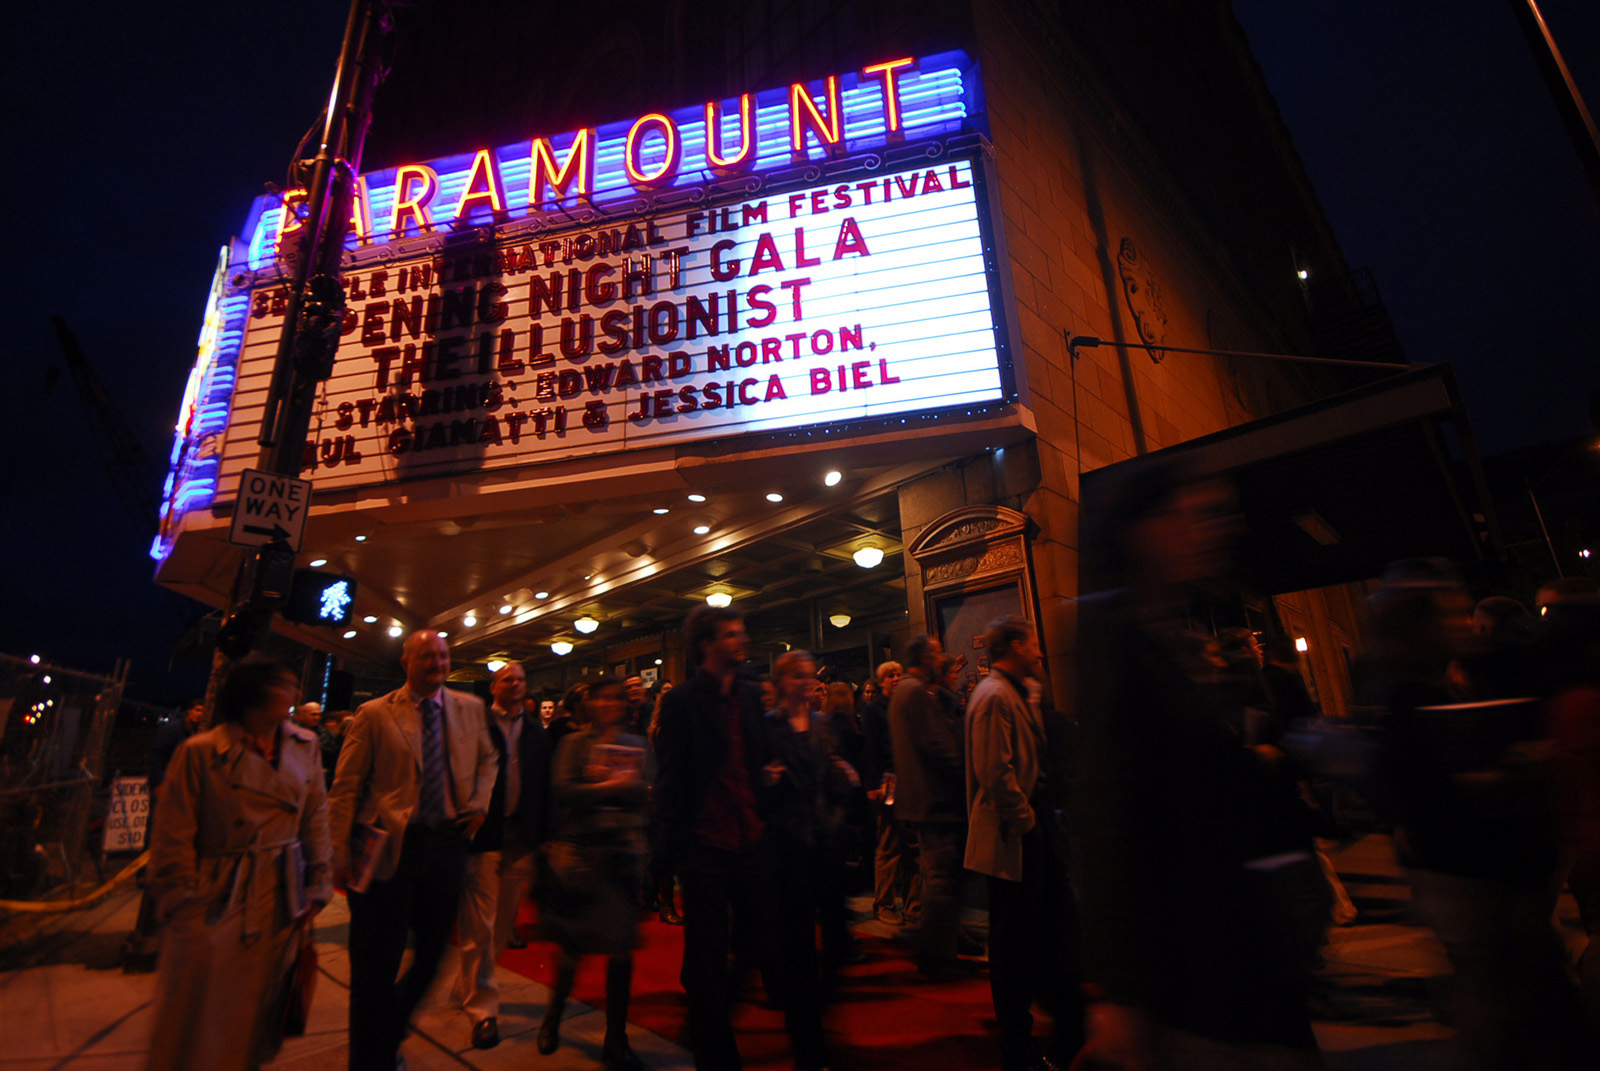 Opening Night of the 32nd Seattle International Film Festival at the Paramount Theatre with the film, The Illusionist